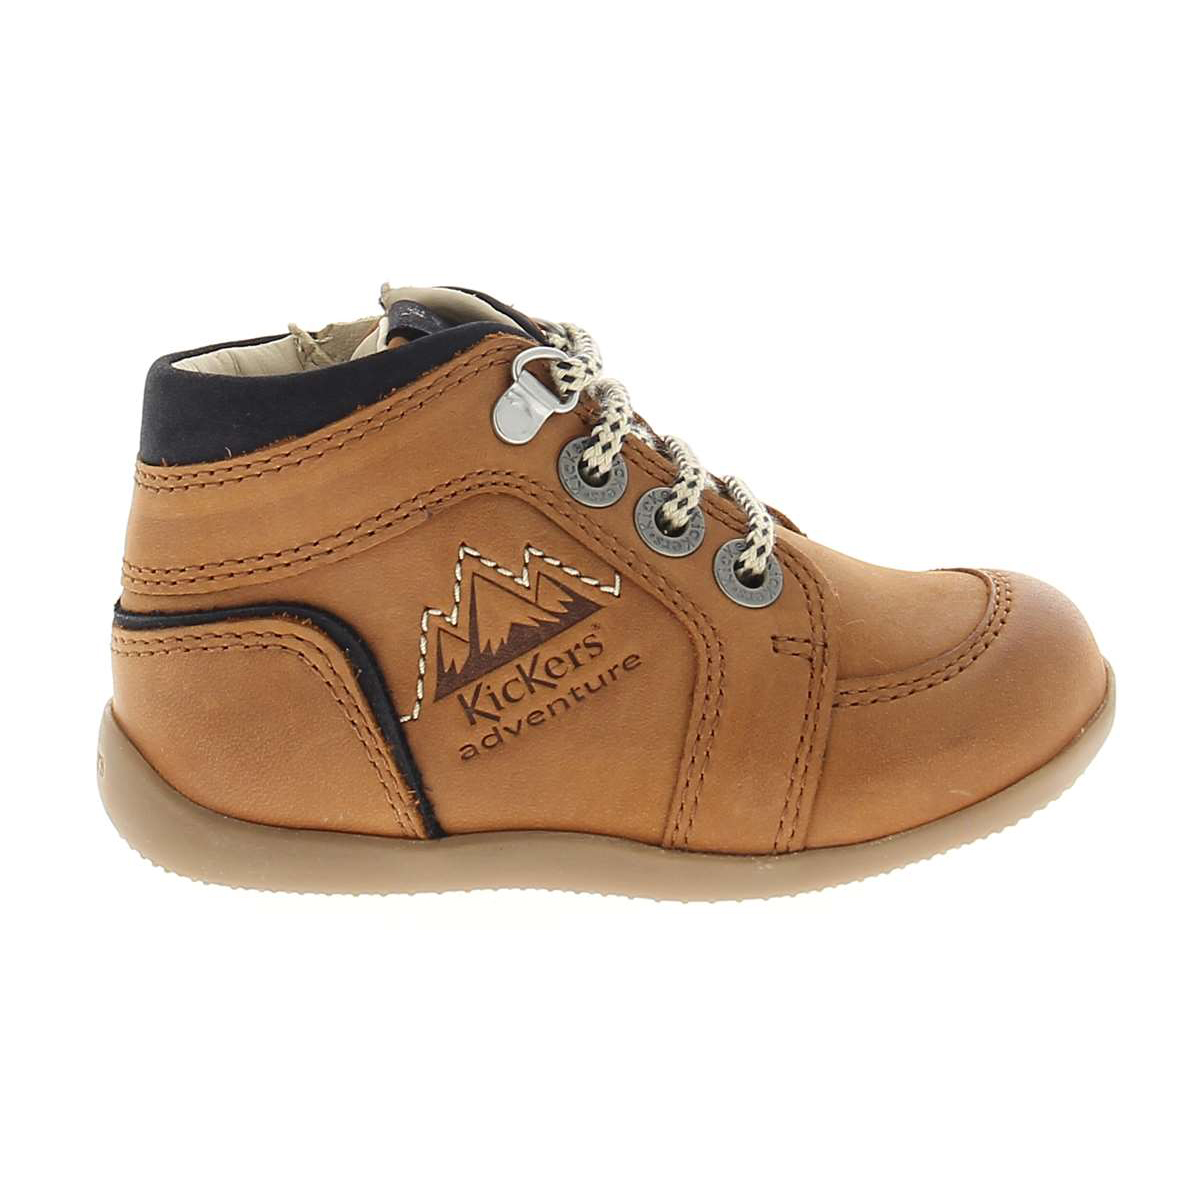 02 - BINS MOUNTAIN - KICKERS - Chaussures montantes - Cuir